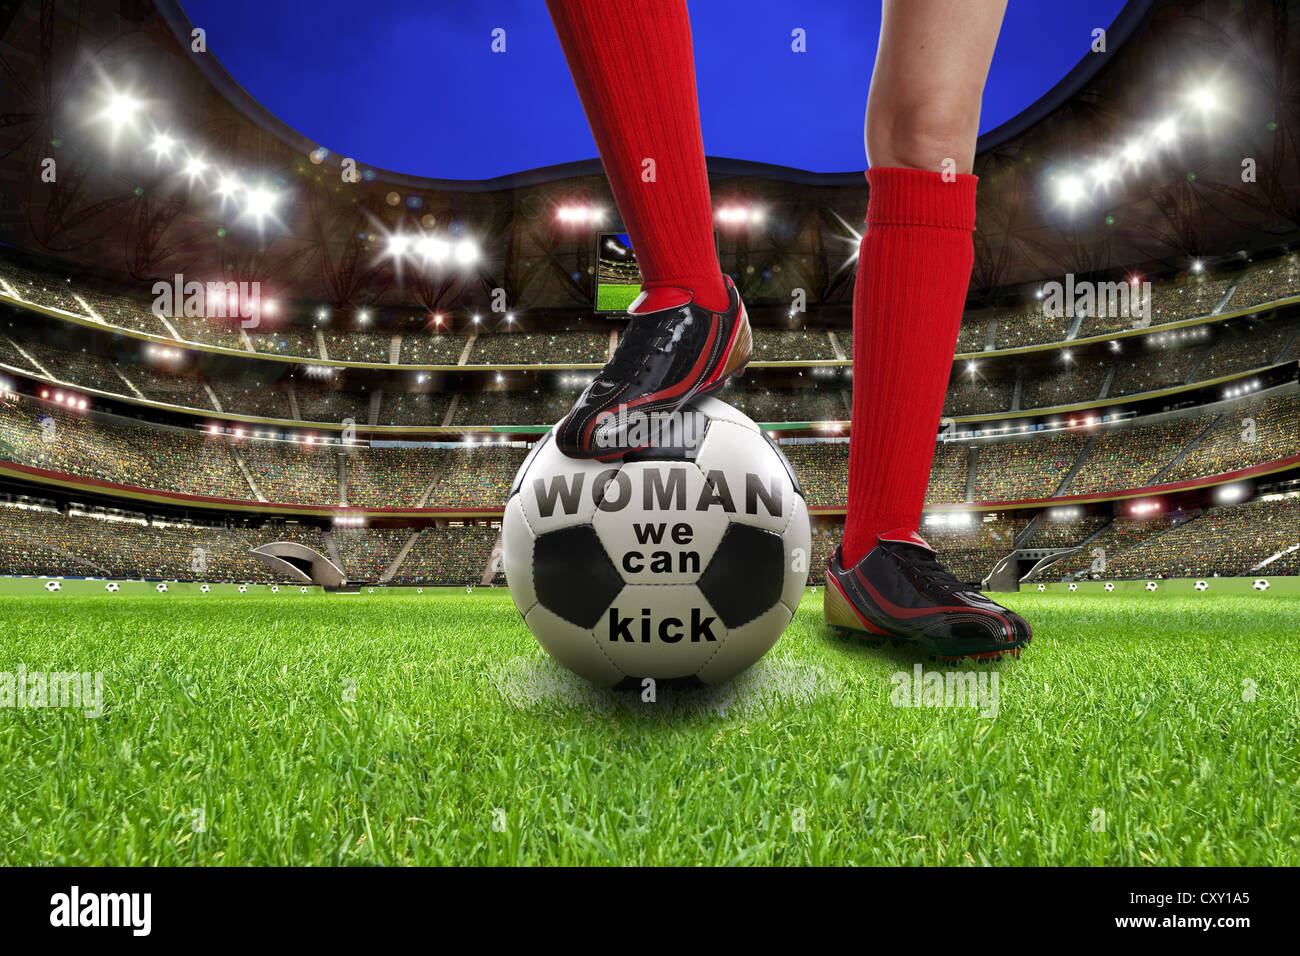 Legs of a female soccer player on a soccer ball labelled, Woman we can kick, at a football stadium, illustration Stock Photo